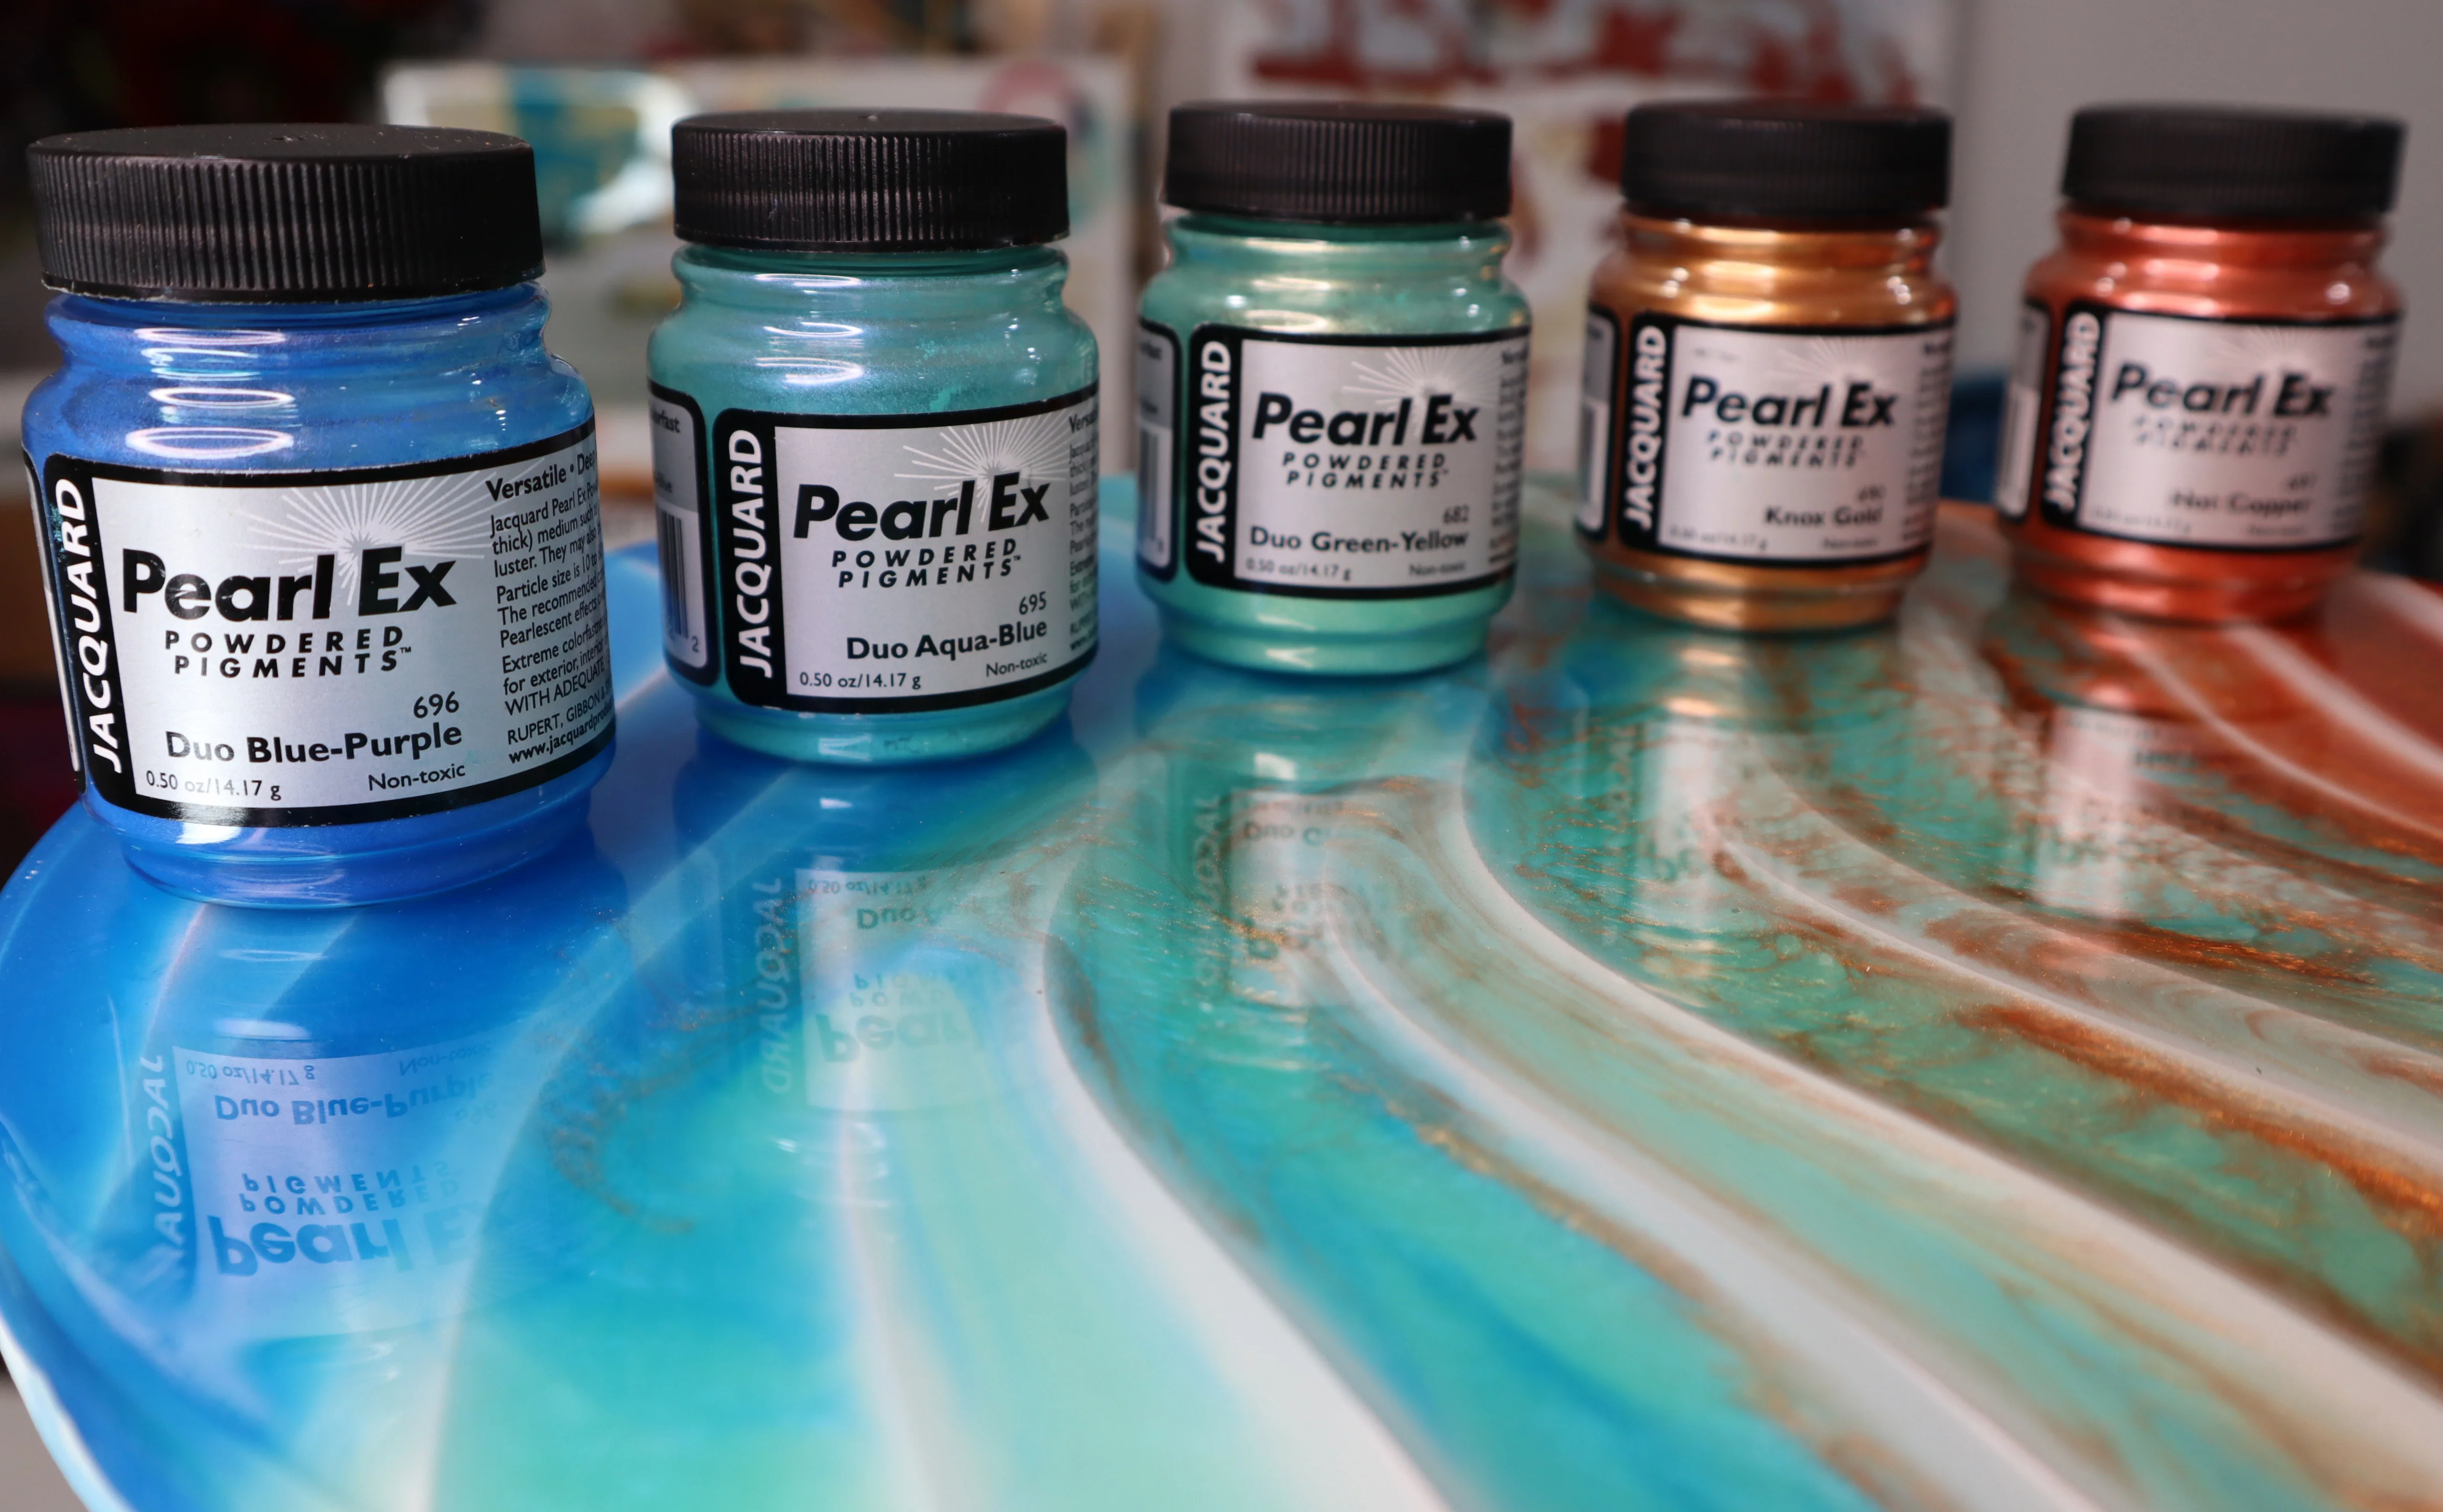 Epoxy Resin Artwork with the 5 NEW Pearl Ex Colors on Vimeo